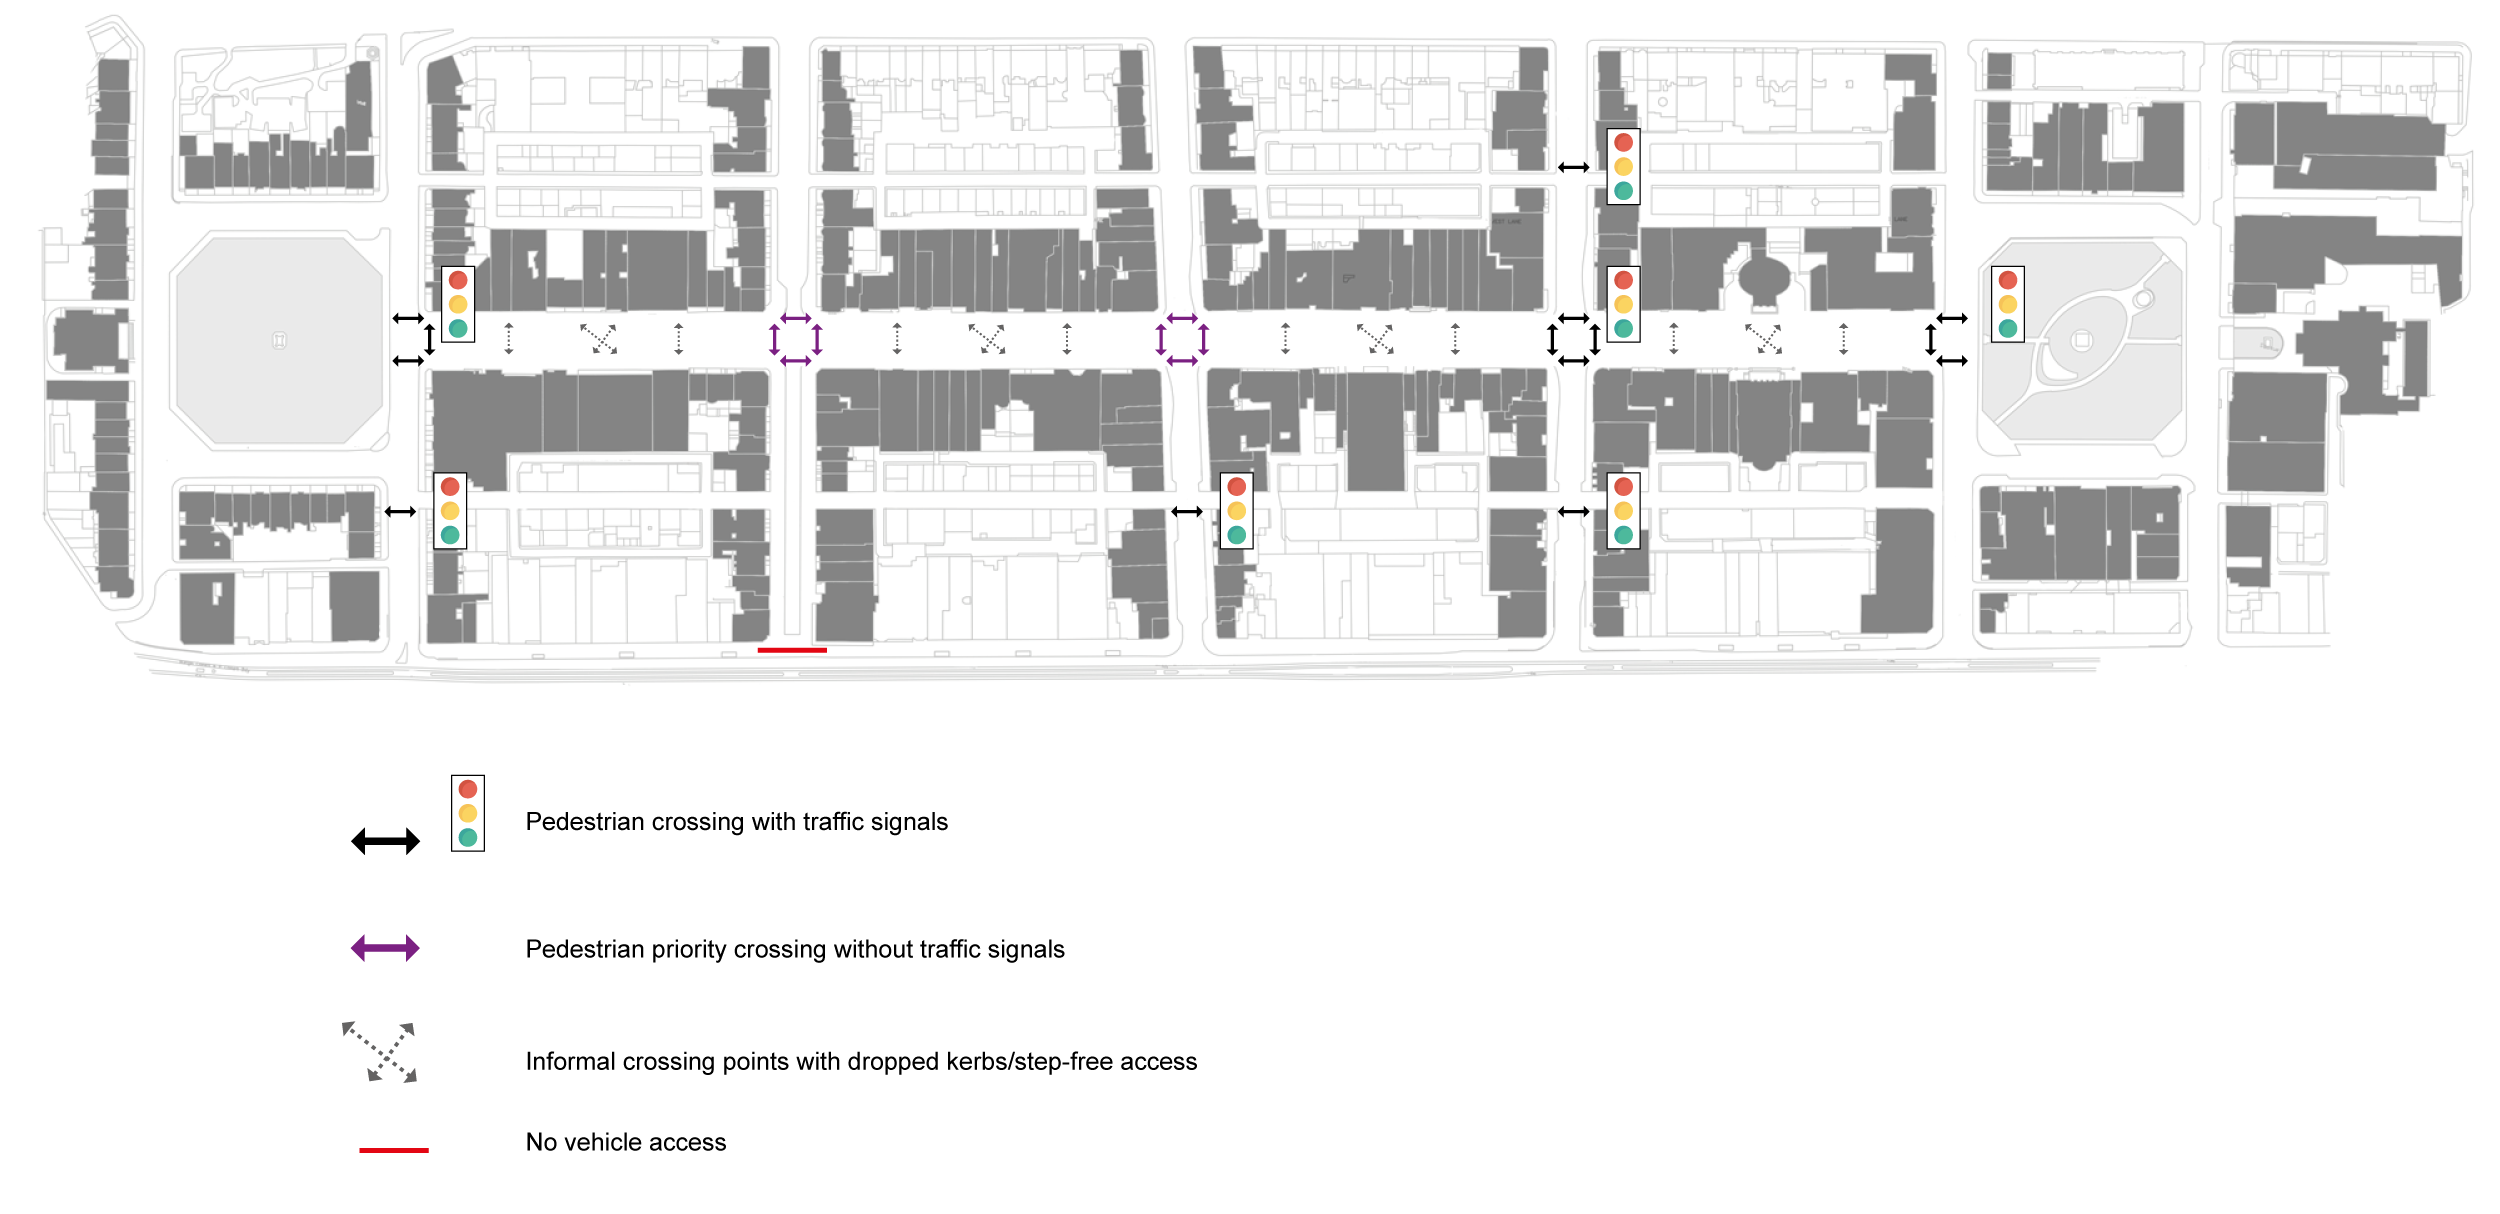 Diagram showing all crossing points in the street.